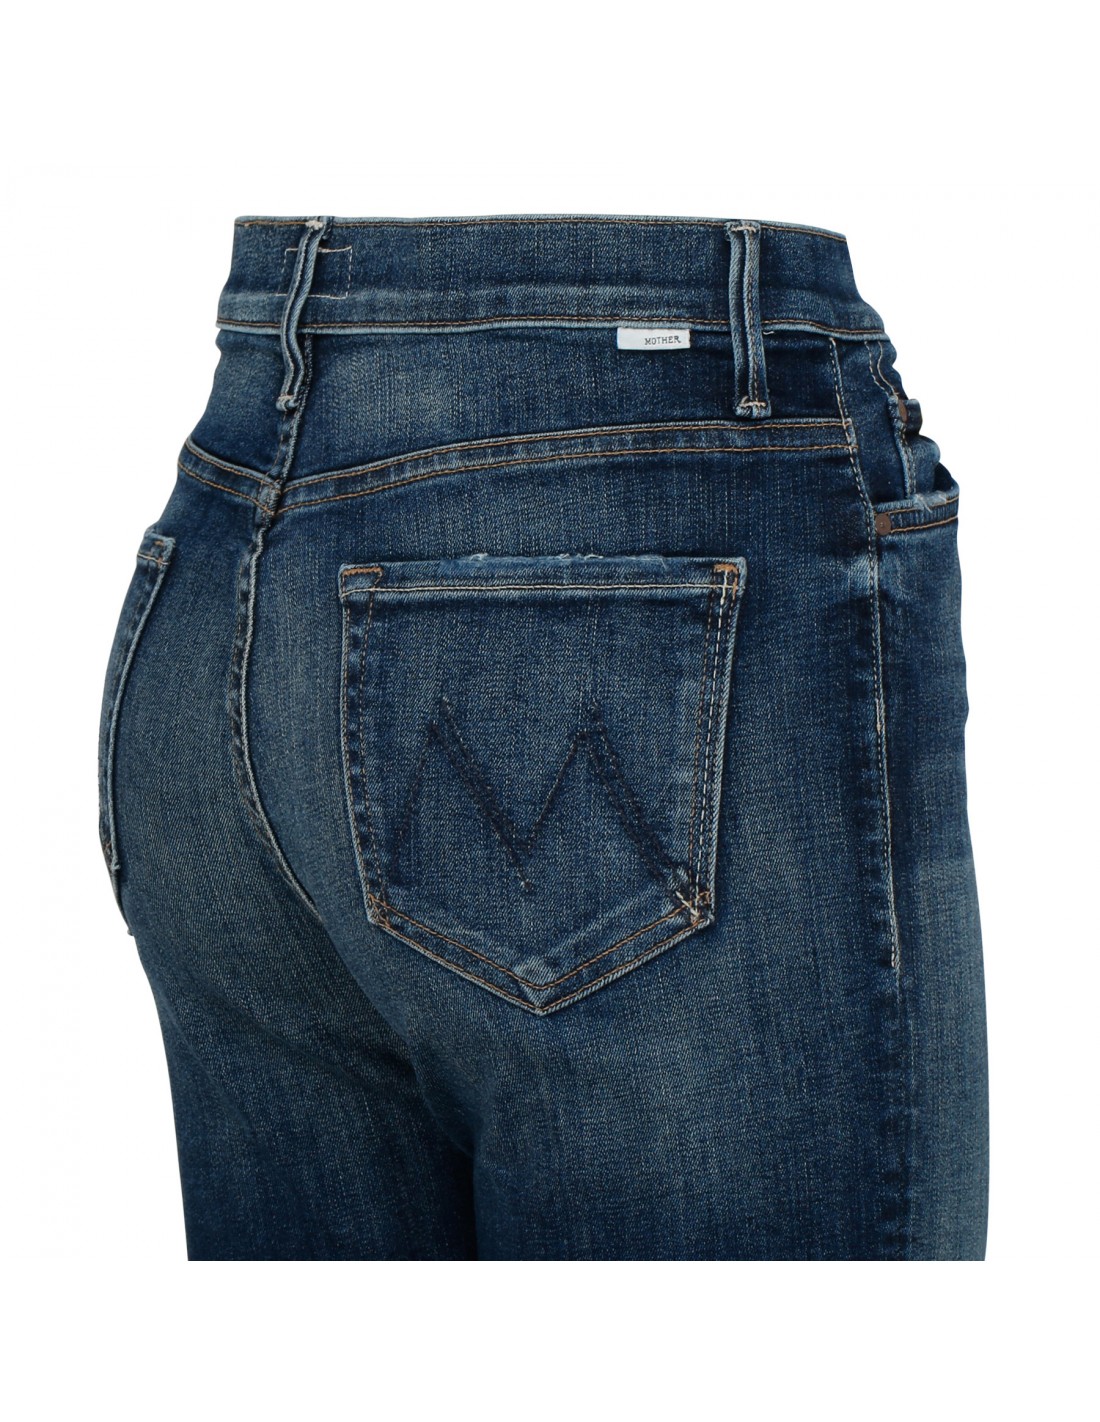 The Swooner Rascal jeans